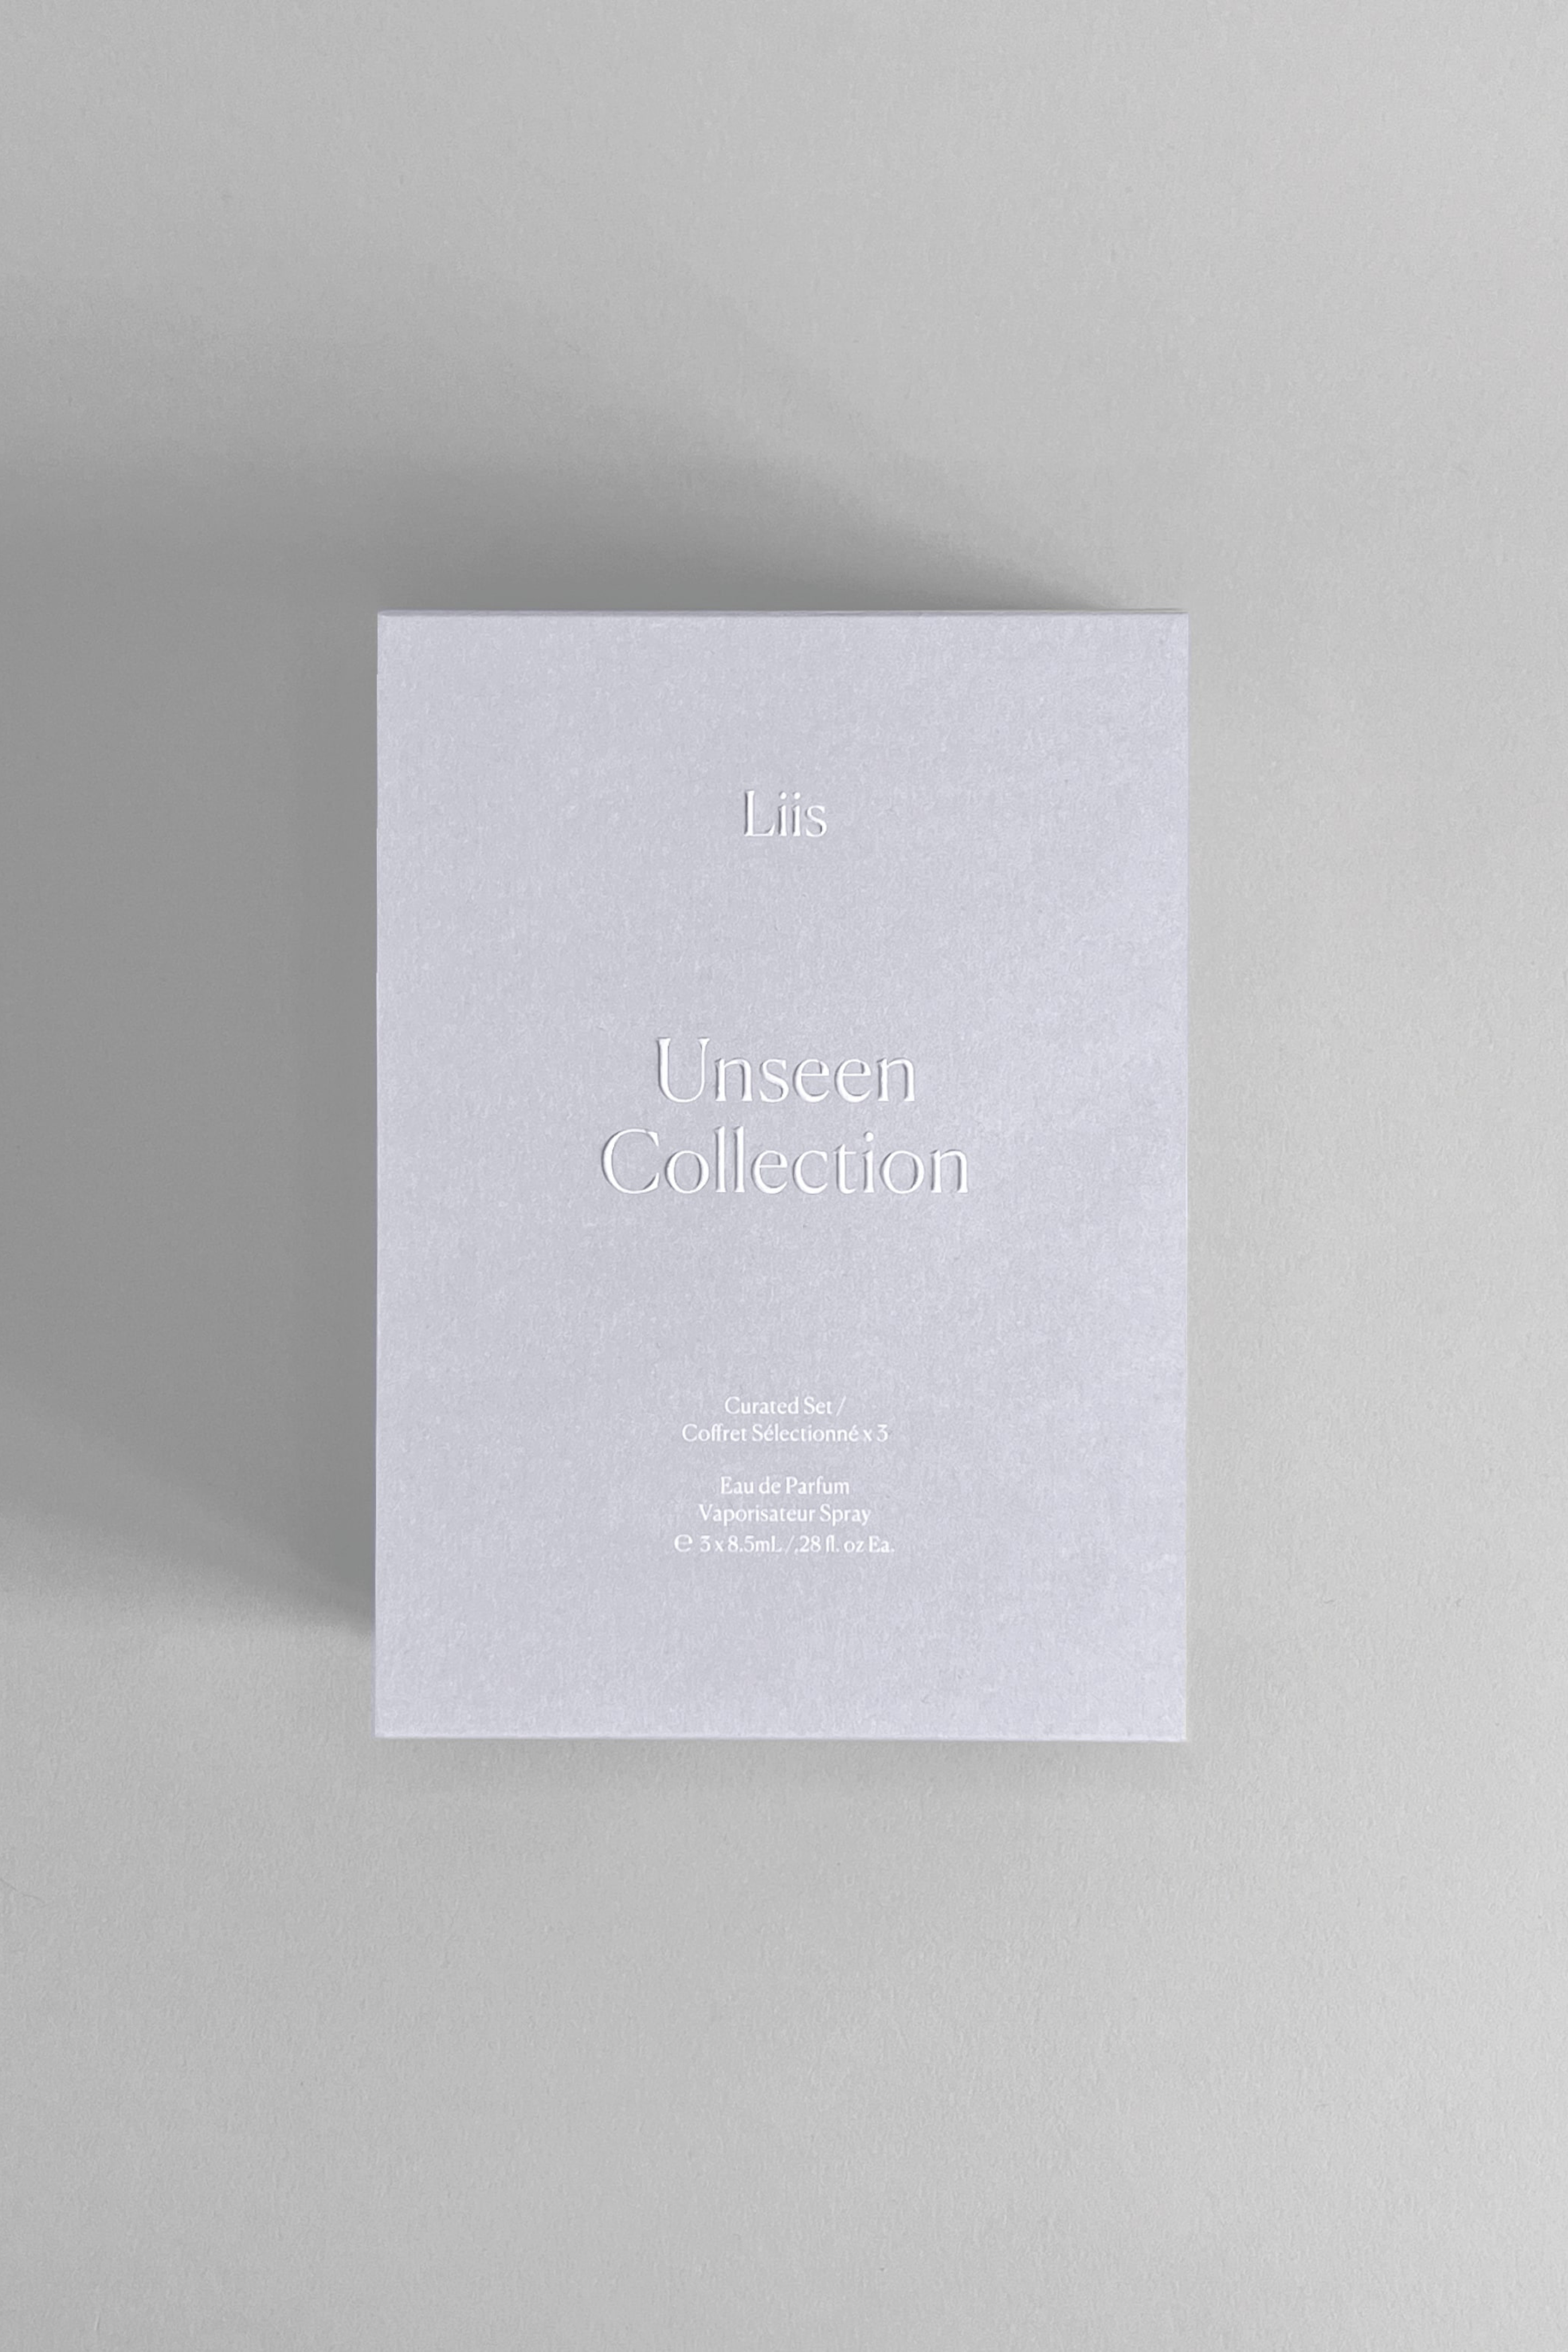 LIIS Unseen Collection